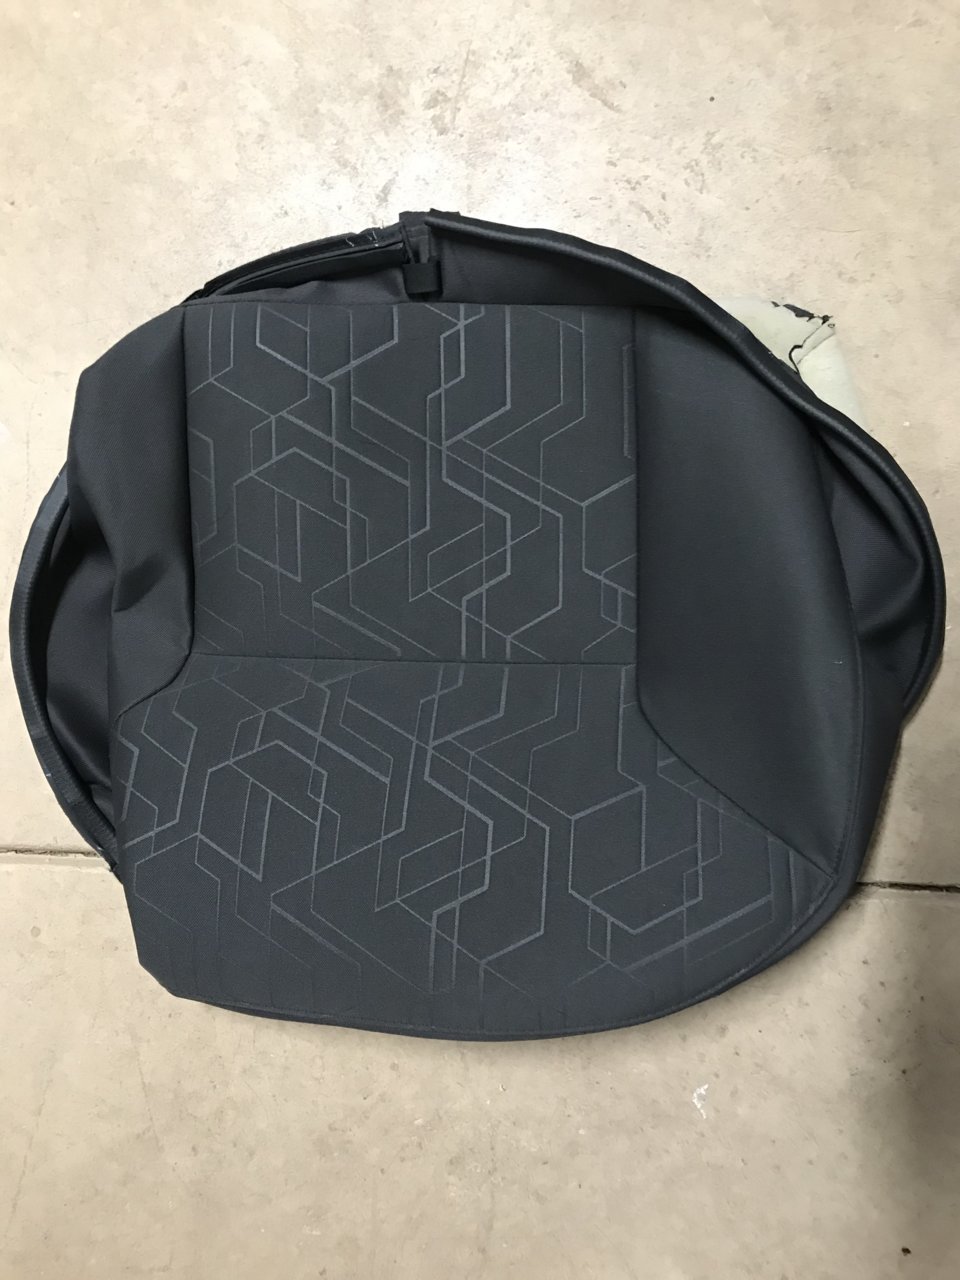 SOLD - TRD Off Road OEM Seat Covers | Tacoma World 2018 Toyota Tacoma Trd Off Road Seat Covers